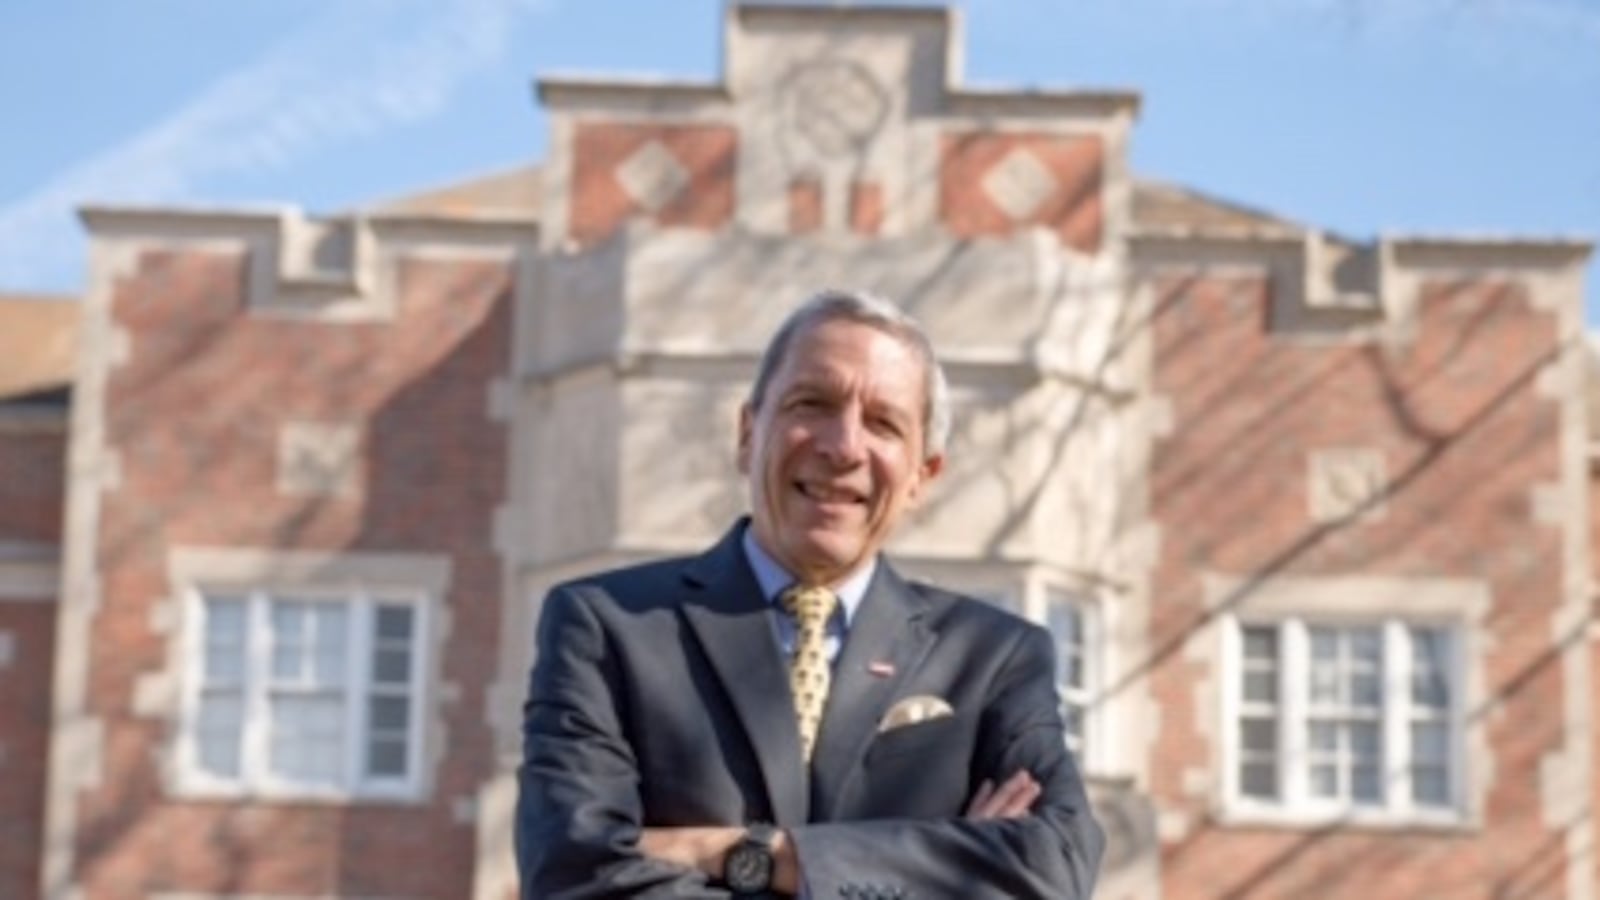 John Smarrelli is the president of Christian Brothers University and the board chairman of New Day Schools, a new group seeking to turn nine private Catholic schools in Memphis into charter schools.